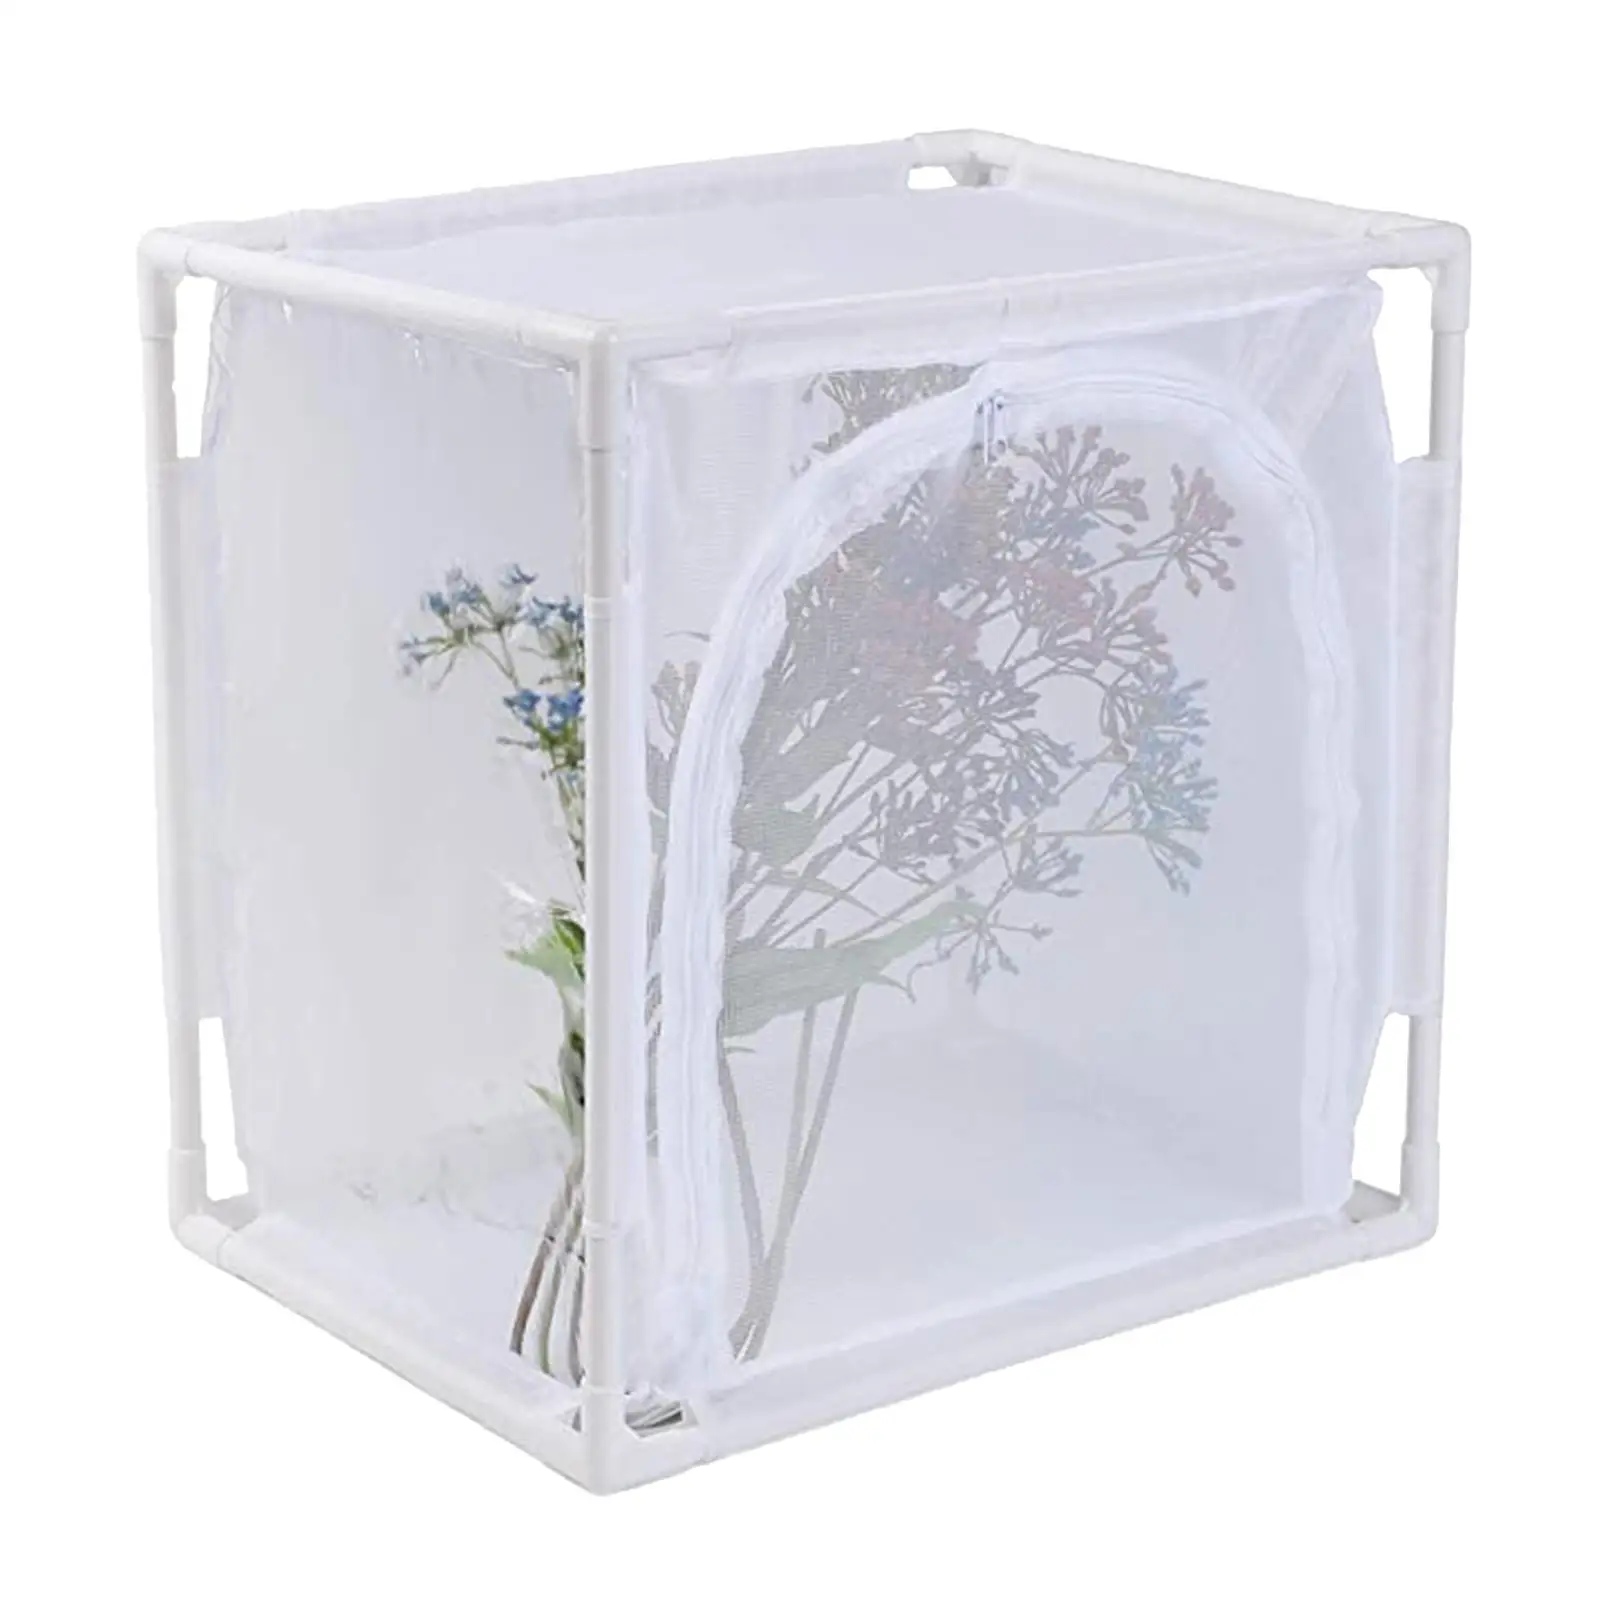 Foldable Insect Butterfly Habitat Cage Insect Mesh Cage Plant and Insects House Incubator for Caterpillars Butterfly 30x40cm